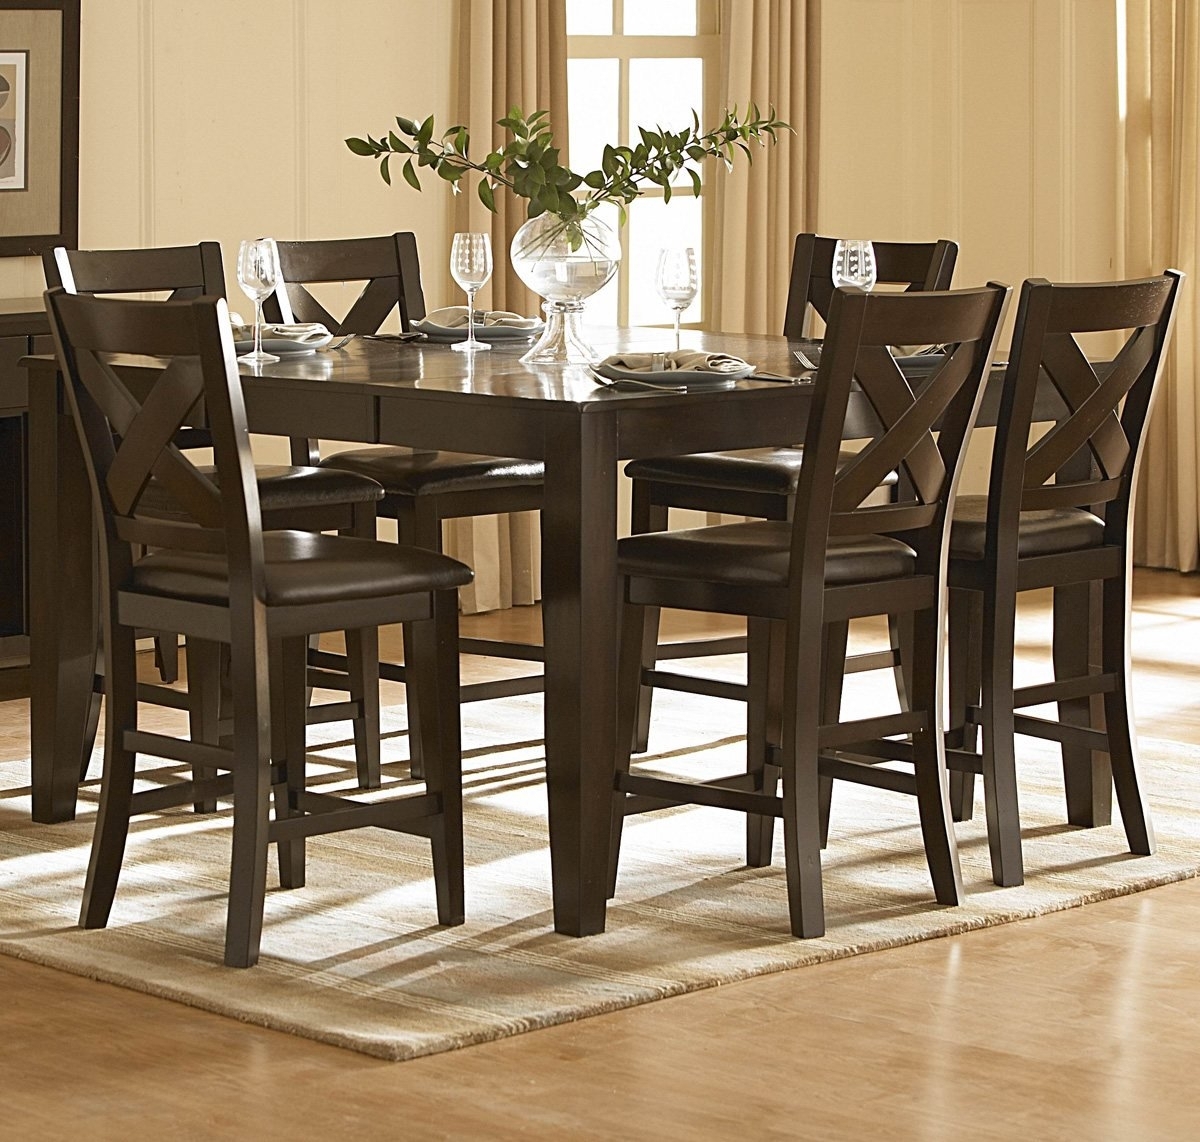 7 Piece Oval Wood Dining Room Table Sets